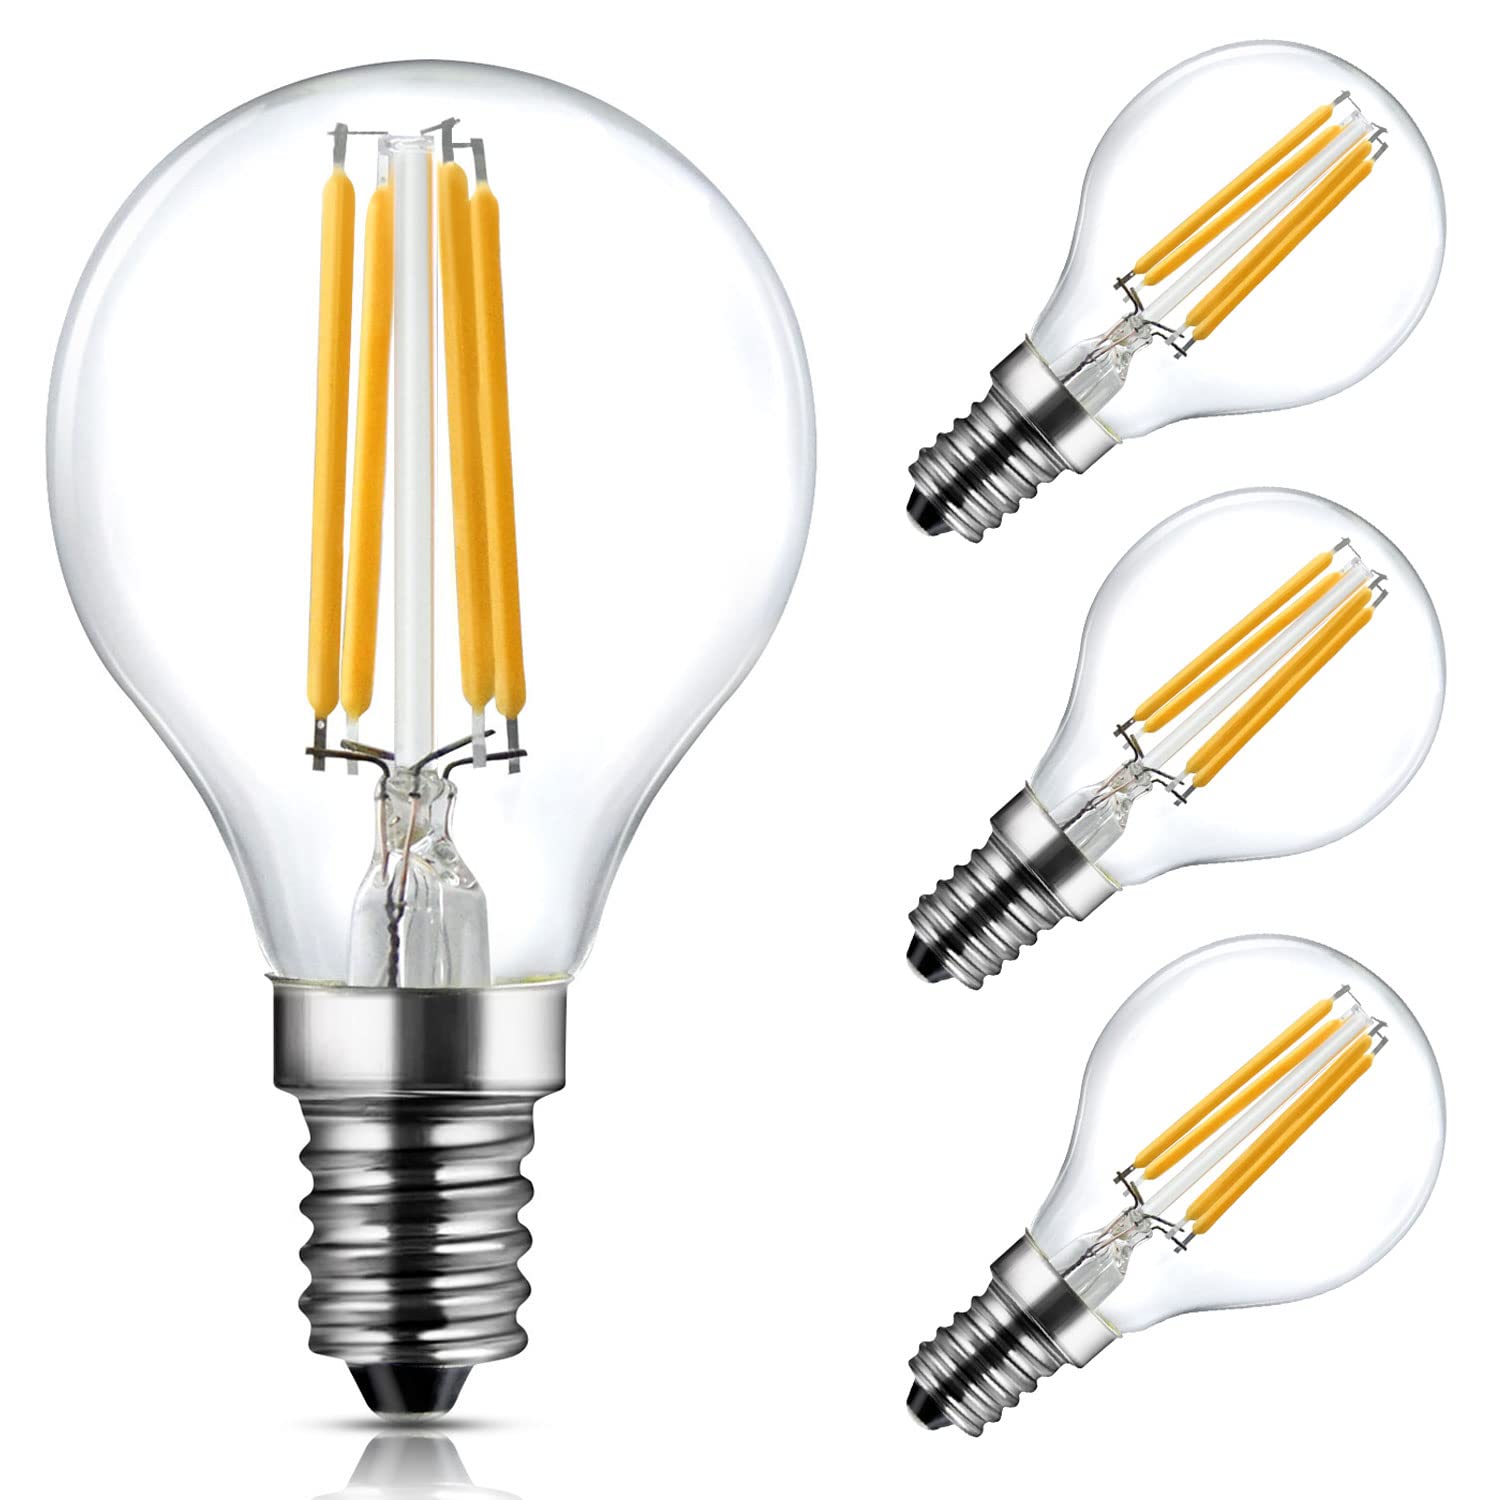 E14 LED Vintage Golf Ball SES Filament Bulb, Non-Flicker & No Buzzling Dimmable G45 Glass Globe Bulb 4W, 40W Equivalent, 2700K Warm White 400LM, LangPlus+ Small Edison Screw LED Bulbs, 4Pack(E14 G45)